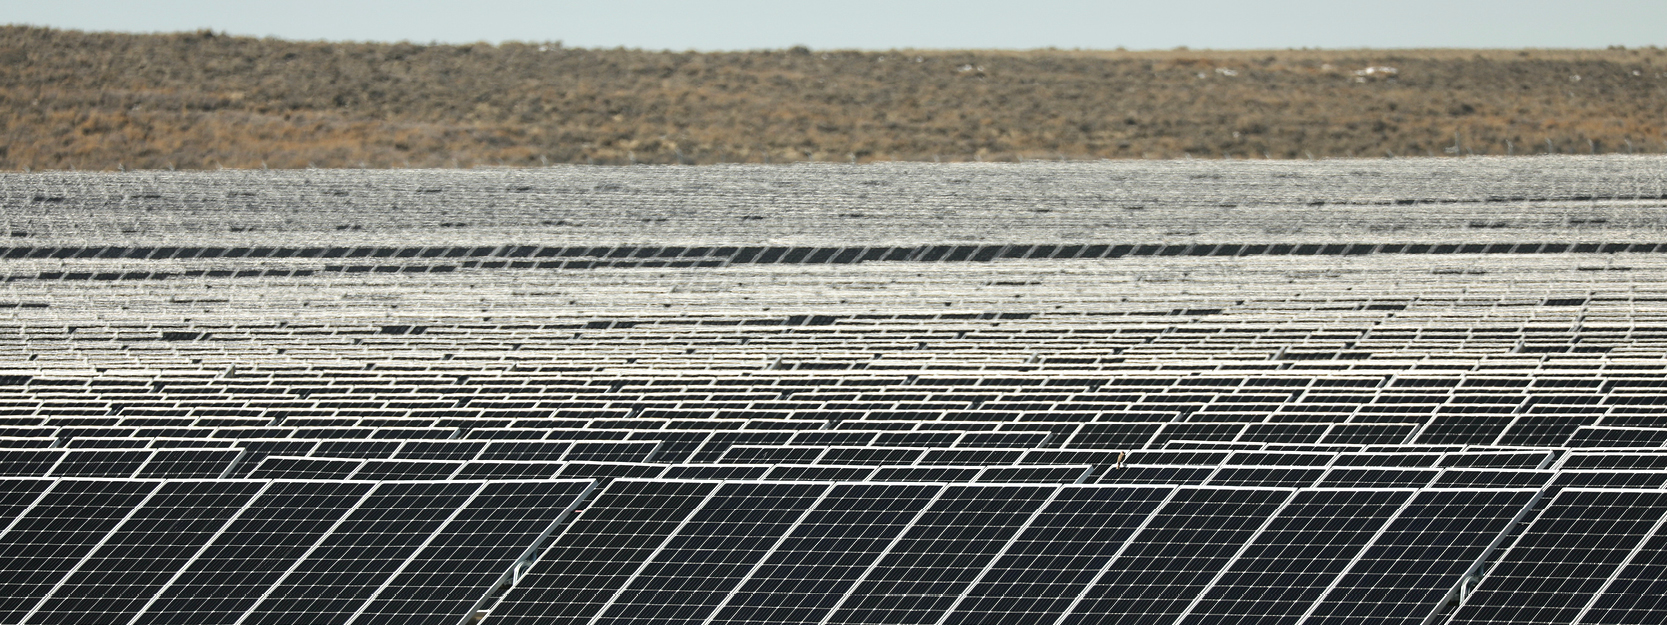 Meeting the Moment: Planning for a Responsible Energy Future with the Western Solar Plan